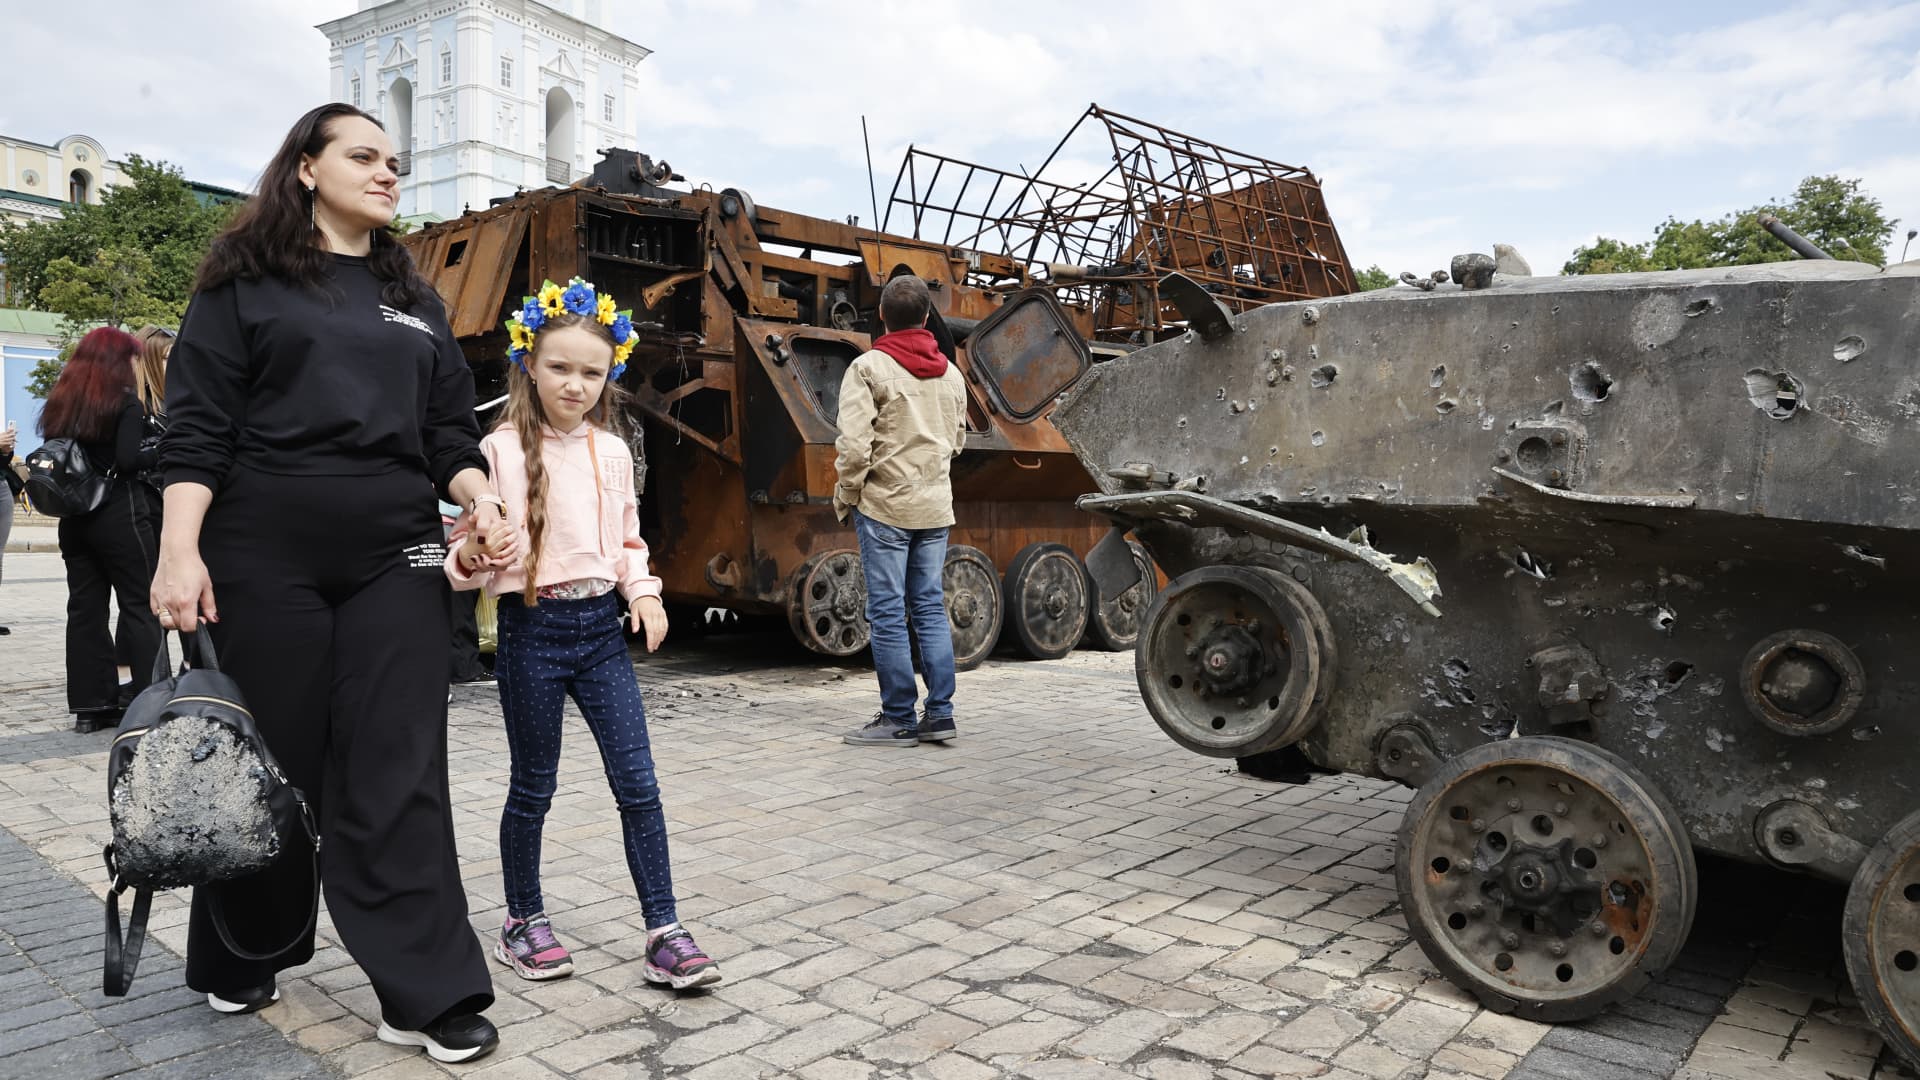 Destroyed Russian tanks and military equipment on display for public at Mykhailivska Square in Kyiv, Ukraine on May 23, 2022 as Russian-Ukrainian conflict continues. 